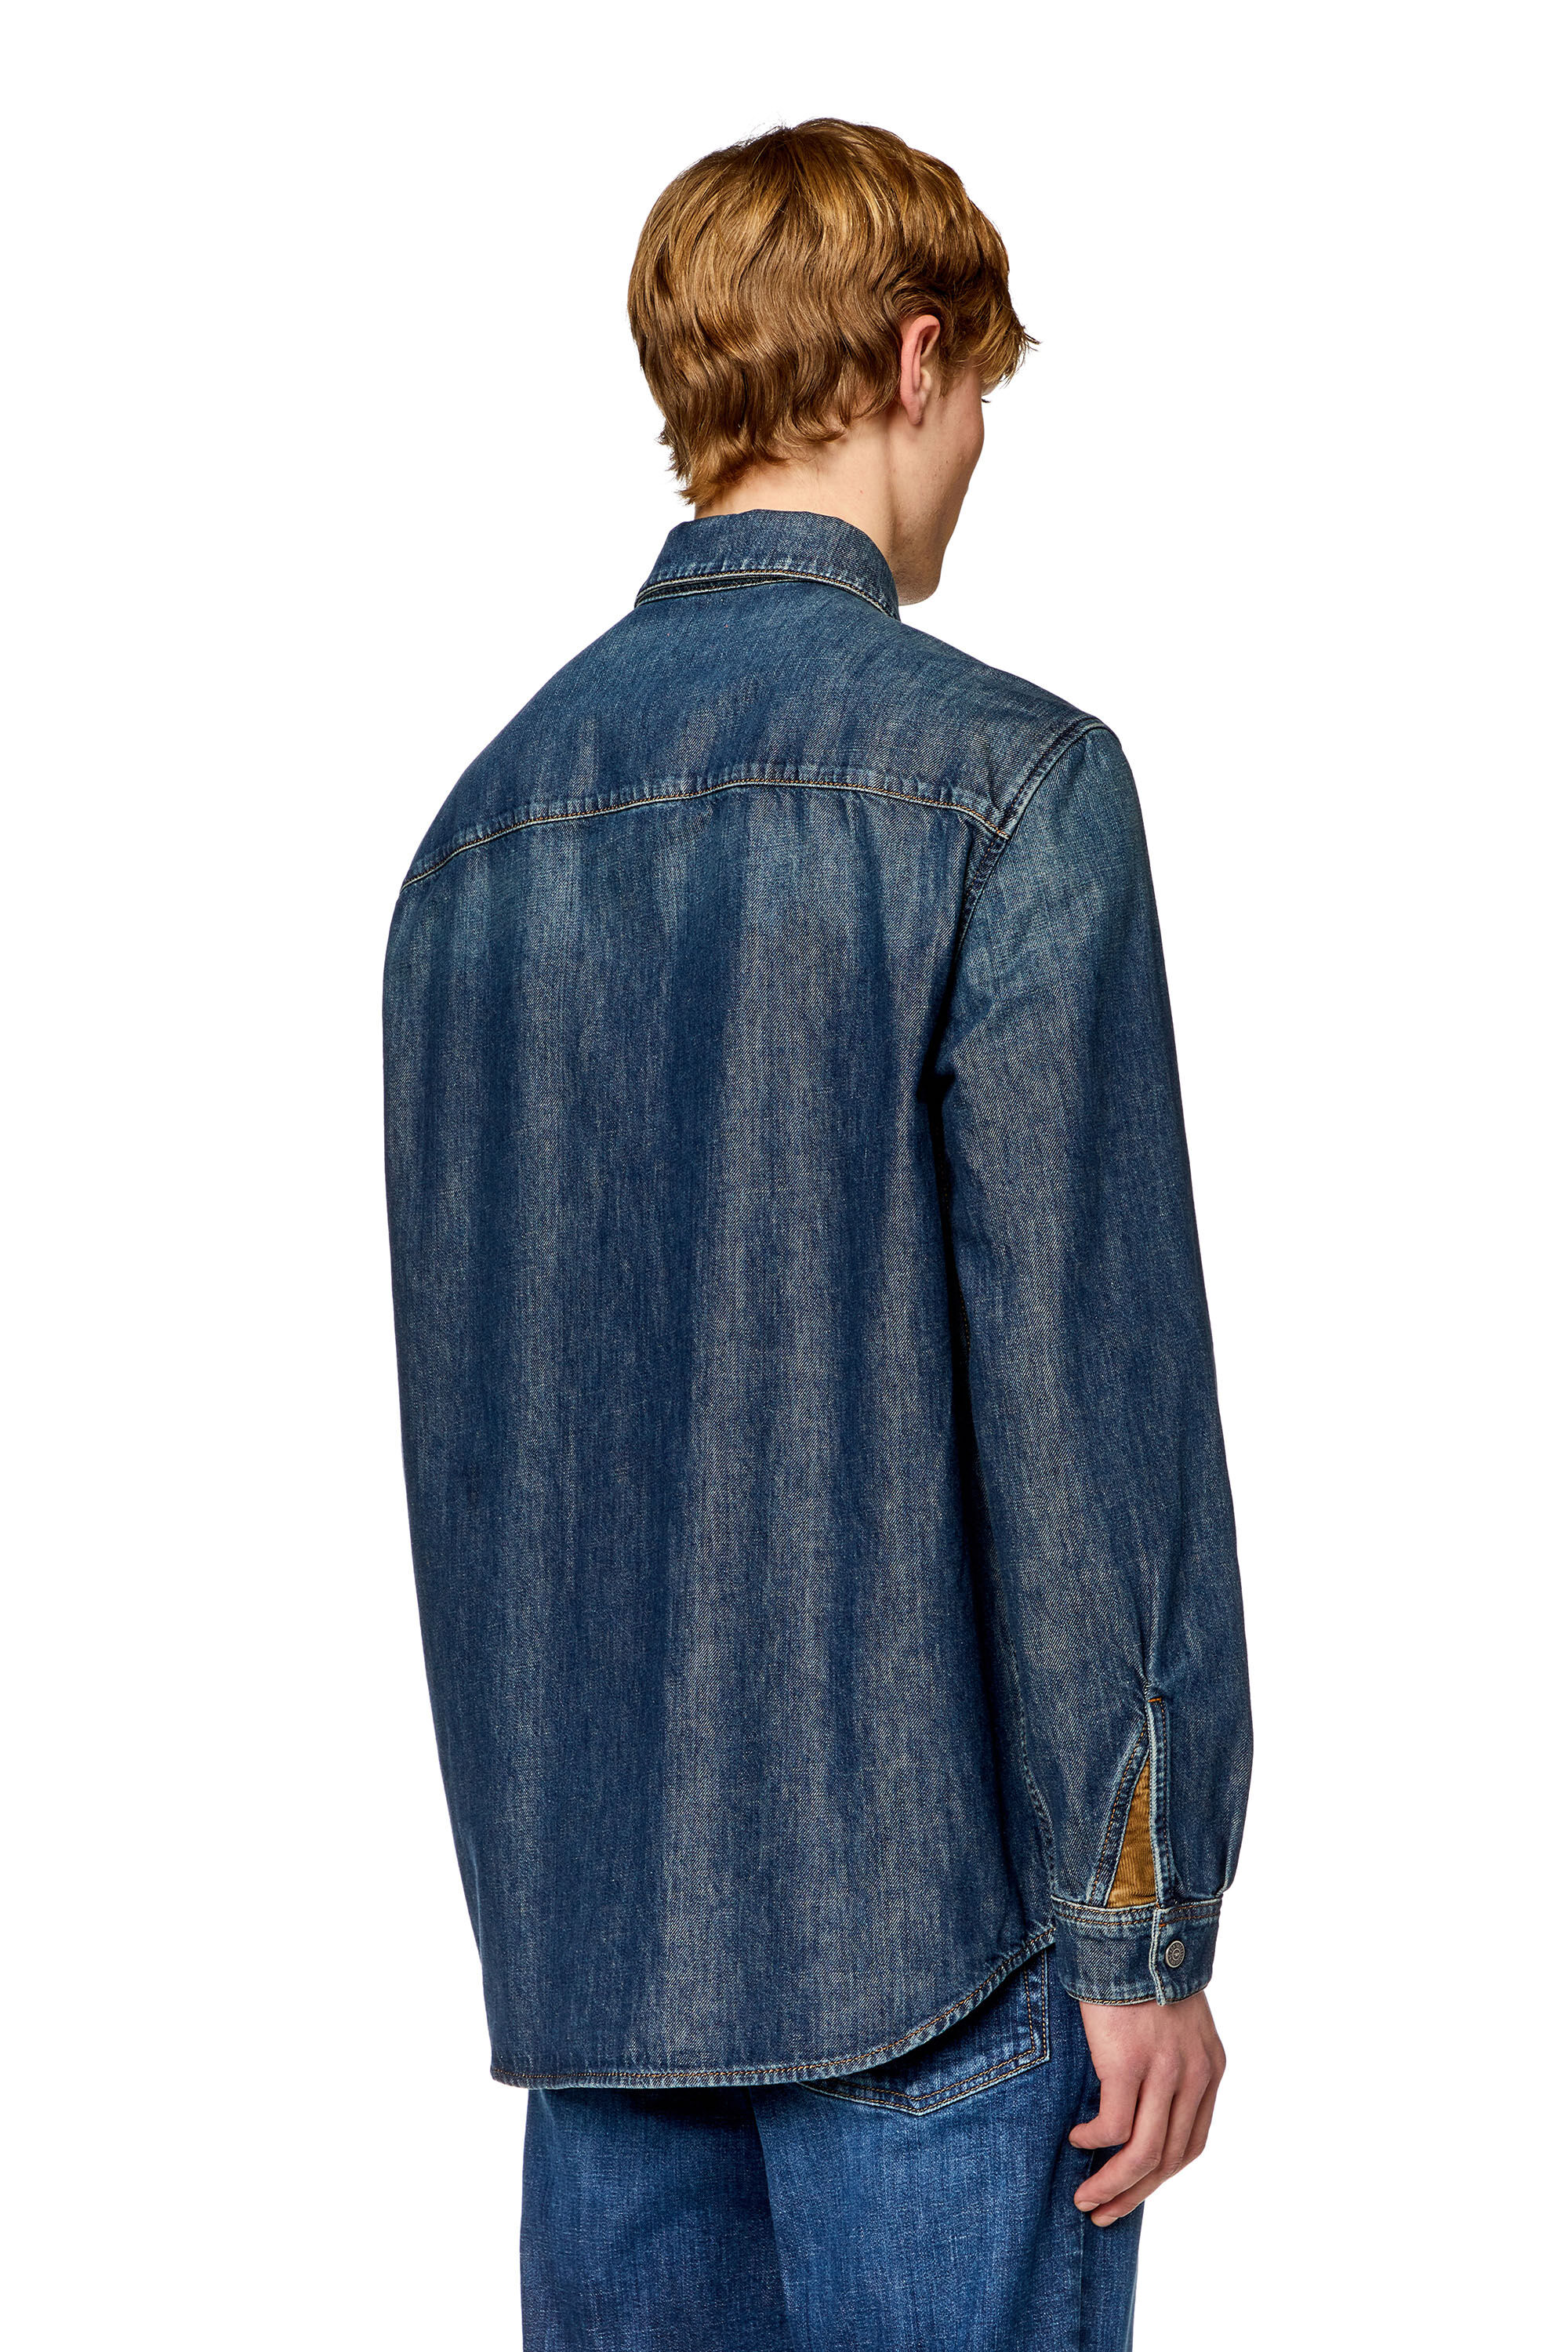 Diesel - D-SIMPLY-RS-D, Man Shirt in denim with contrasting panels in Blue - Image 3